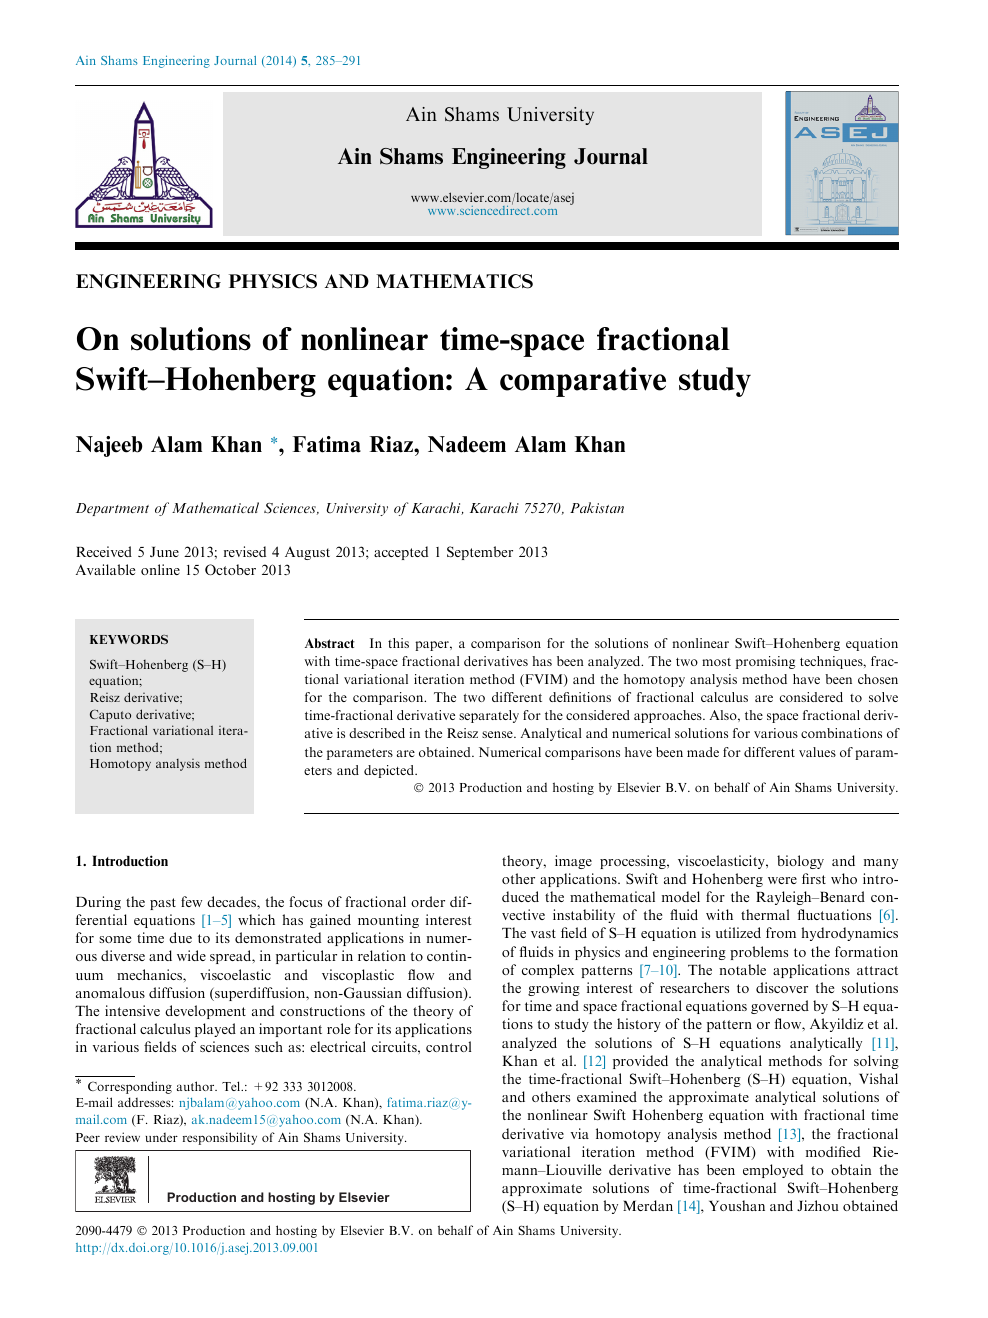 On Solutions Of Nonlinear Time Space Fractional Swift Hohenberg Equation A Comparative Study Topic Of Research Paper In Mathematics Download Scholarly Article Pdf And Read For Free On Cyberleninka Open Science Hub